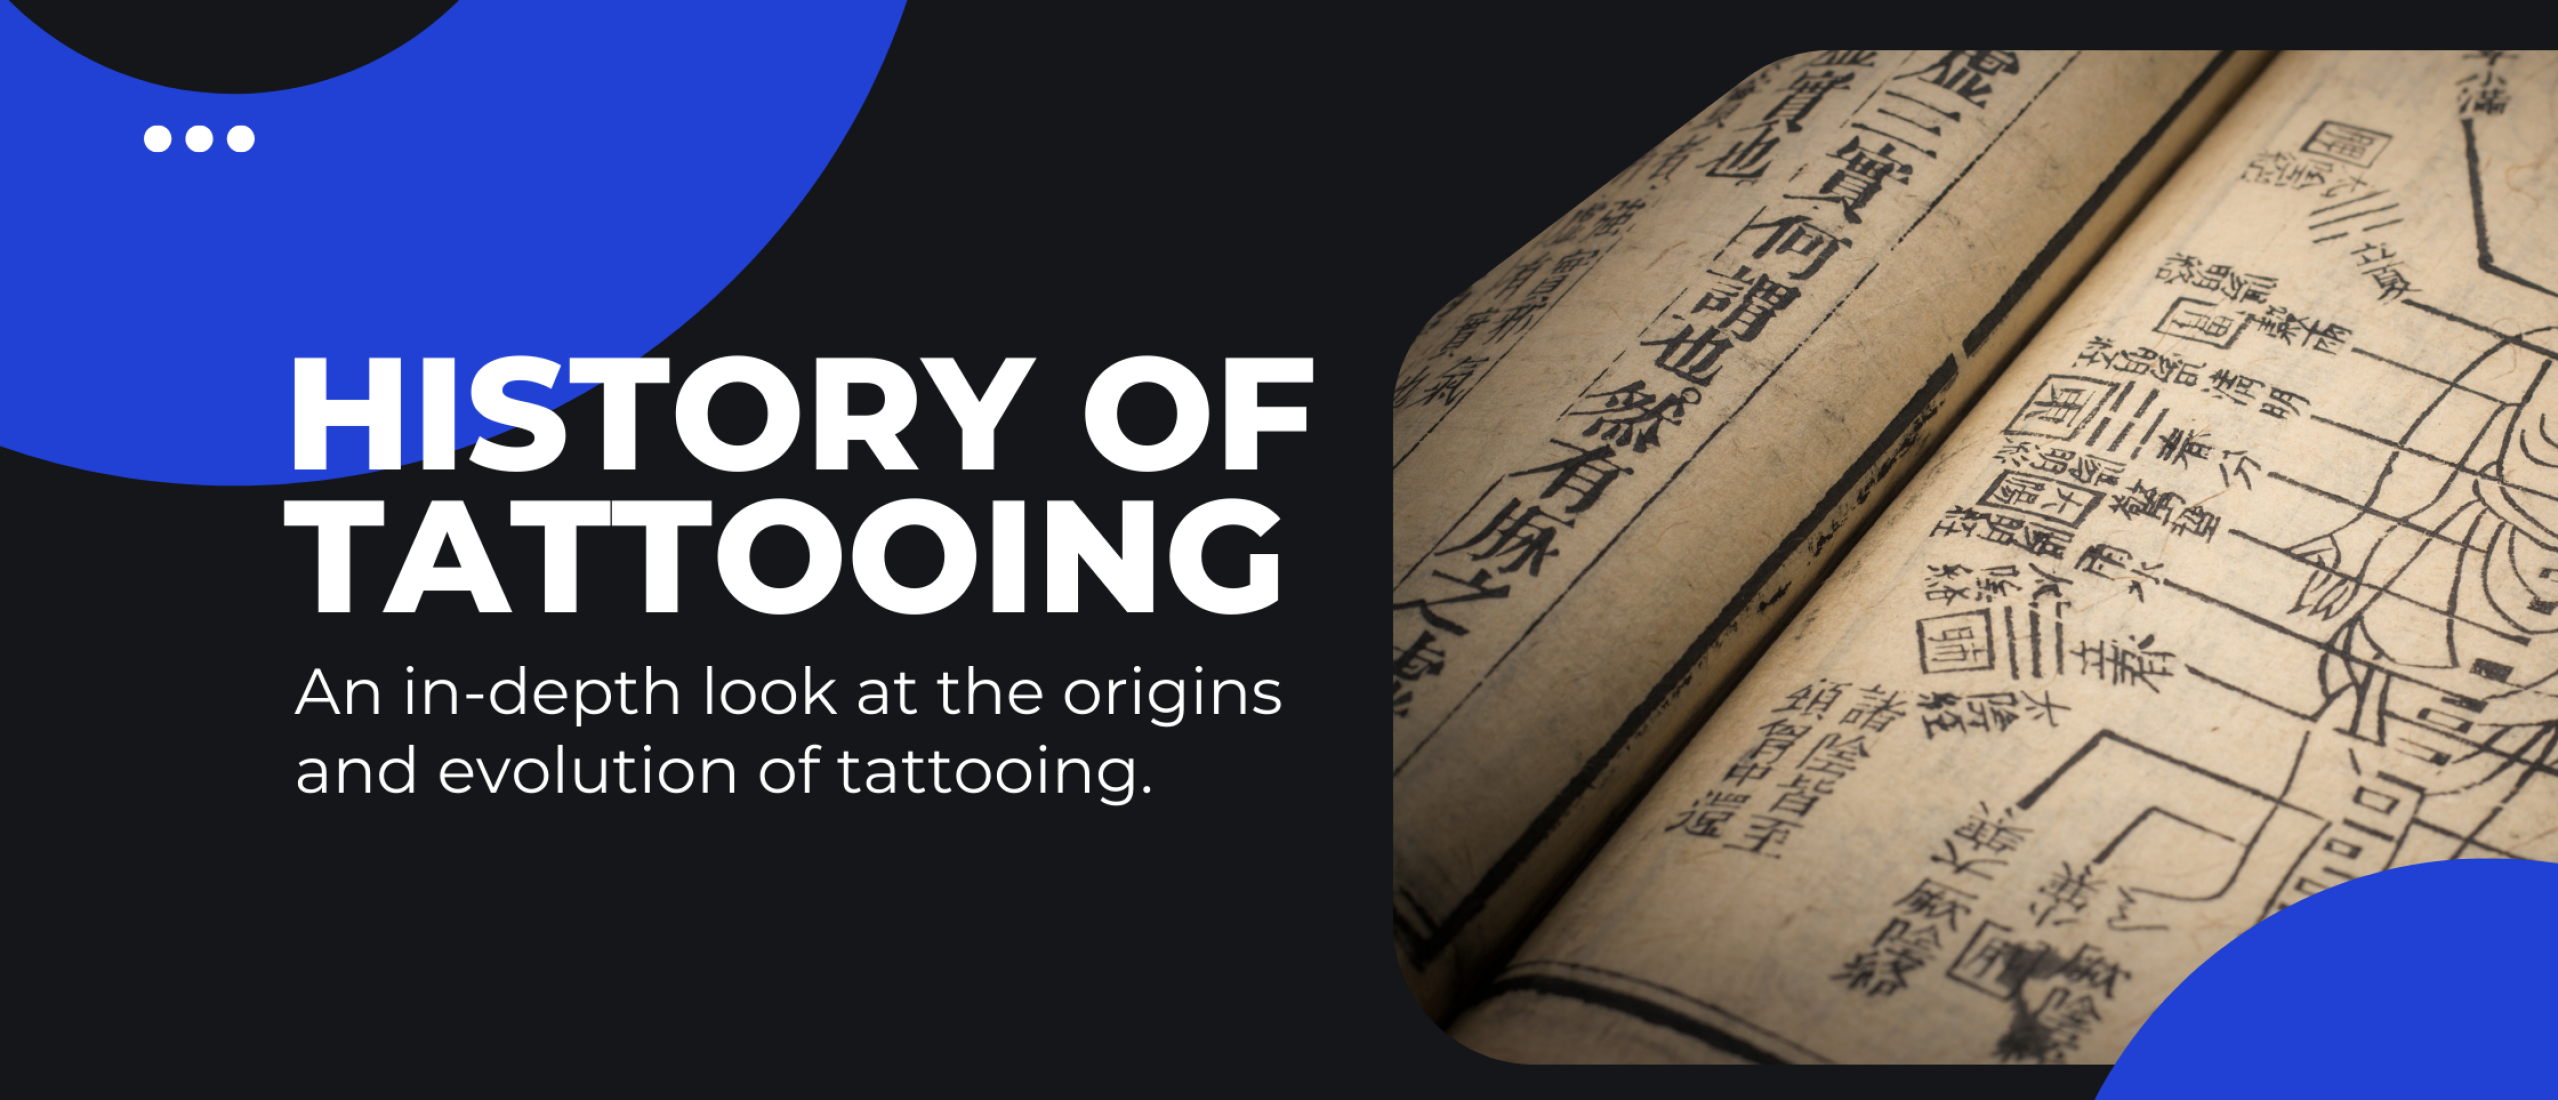 The history and evolution of tattooing